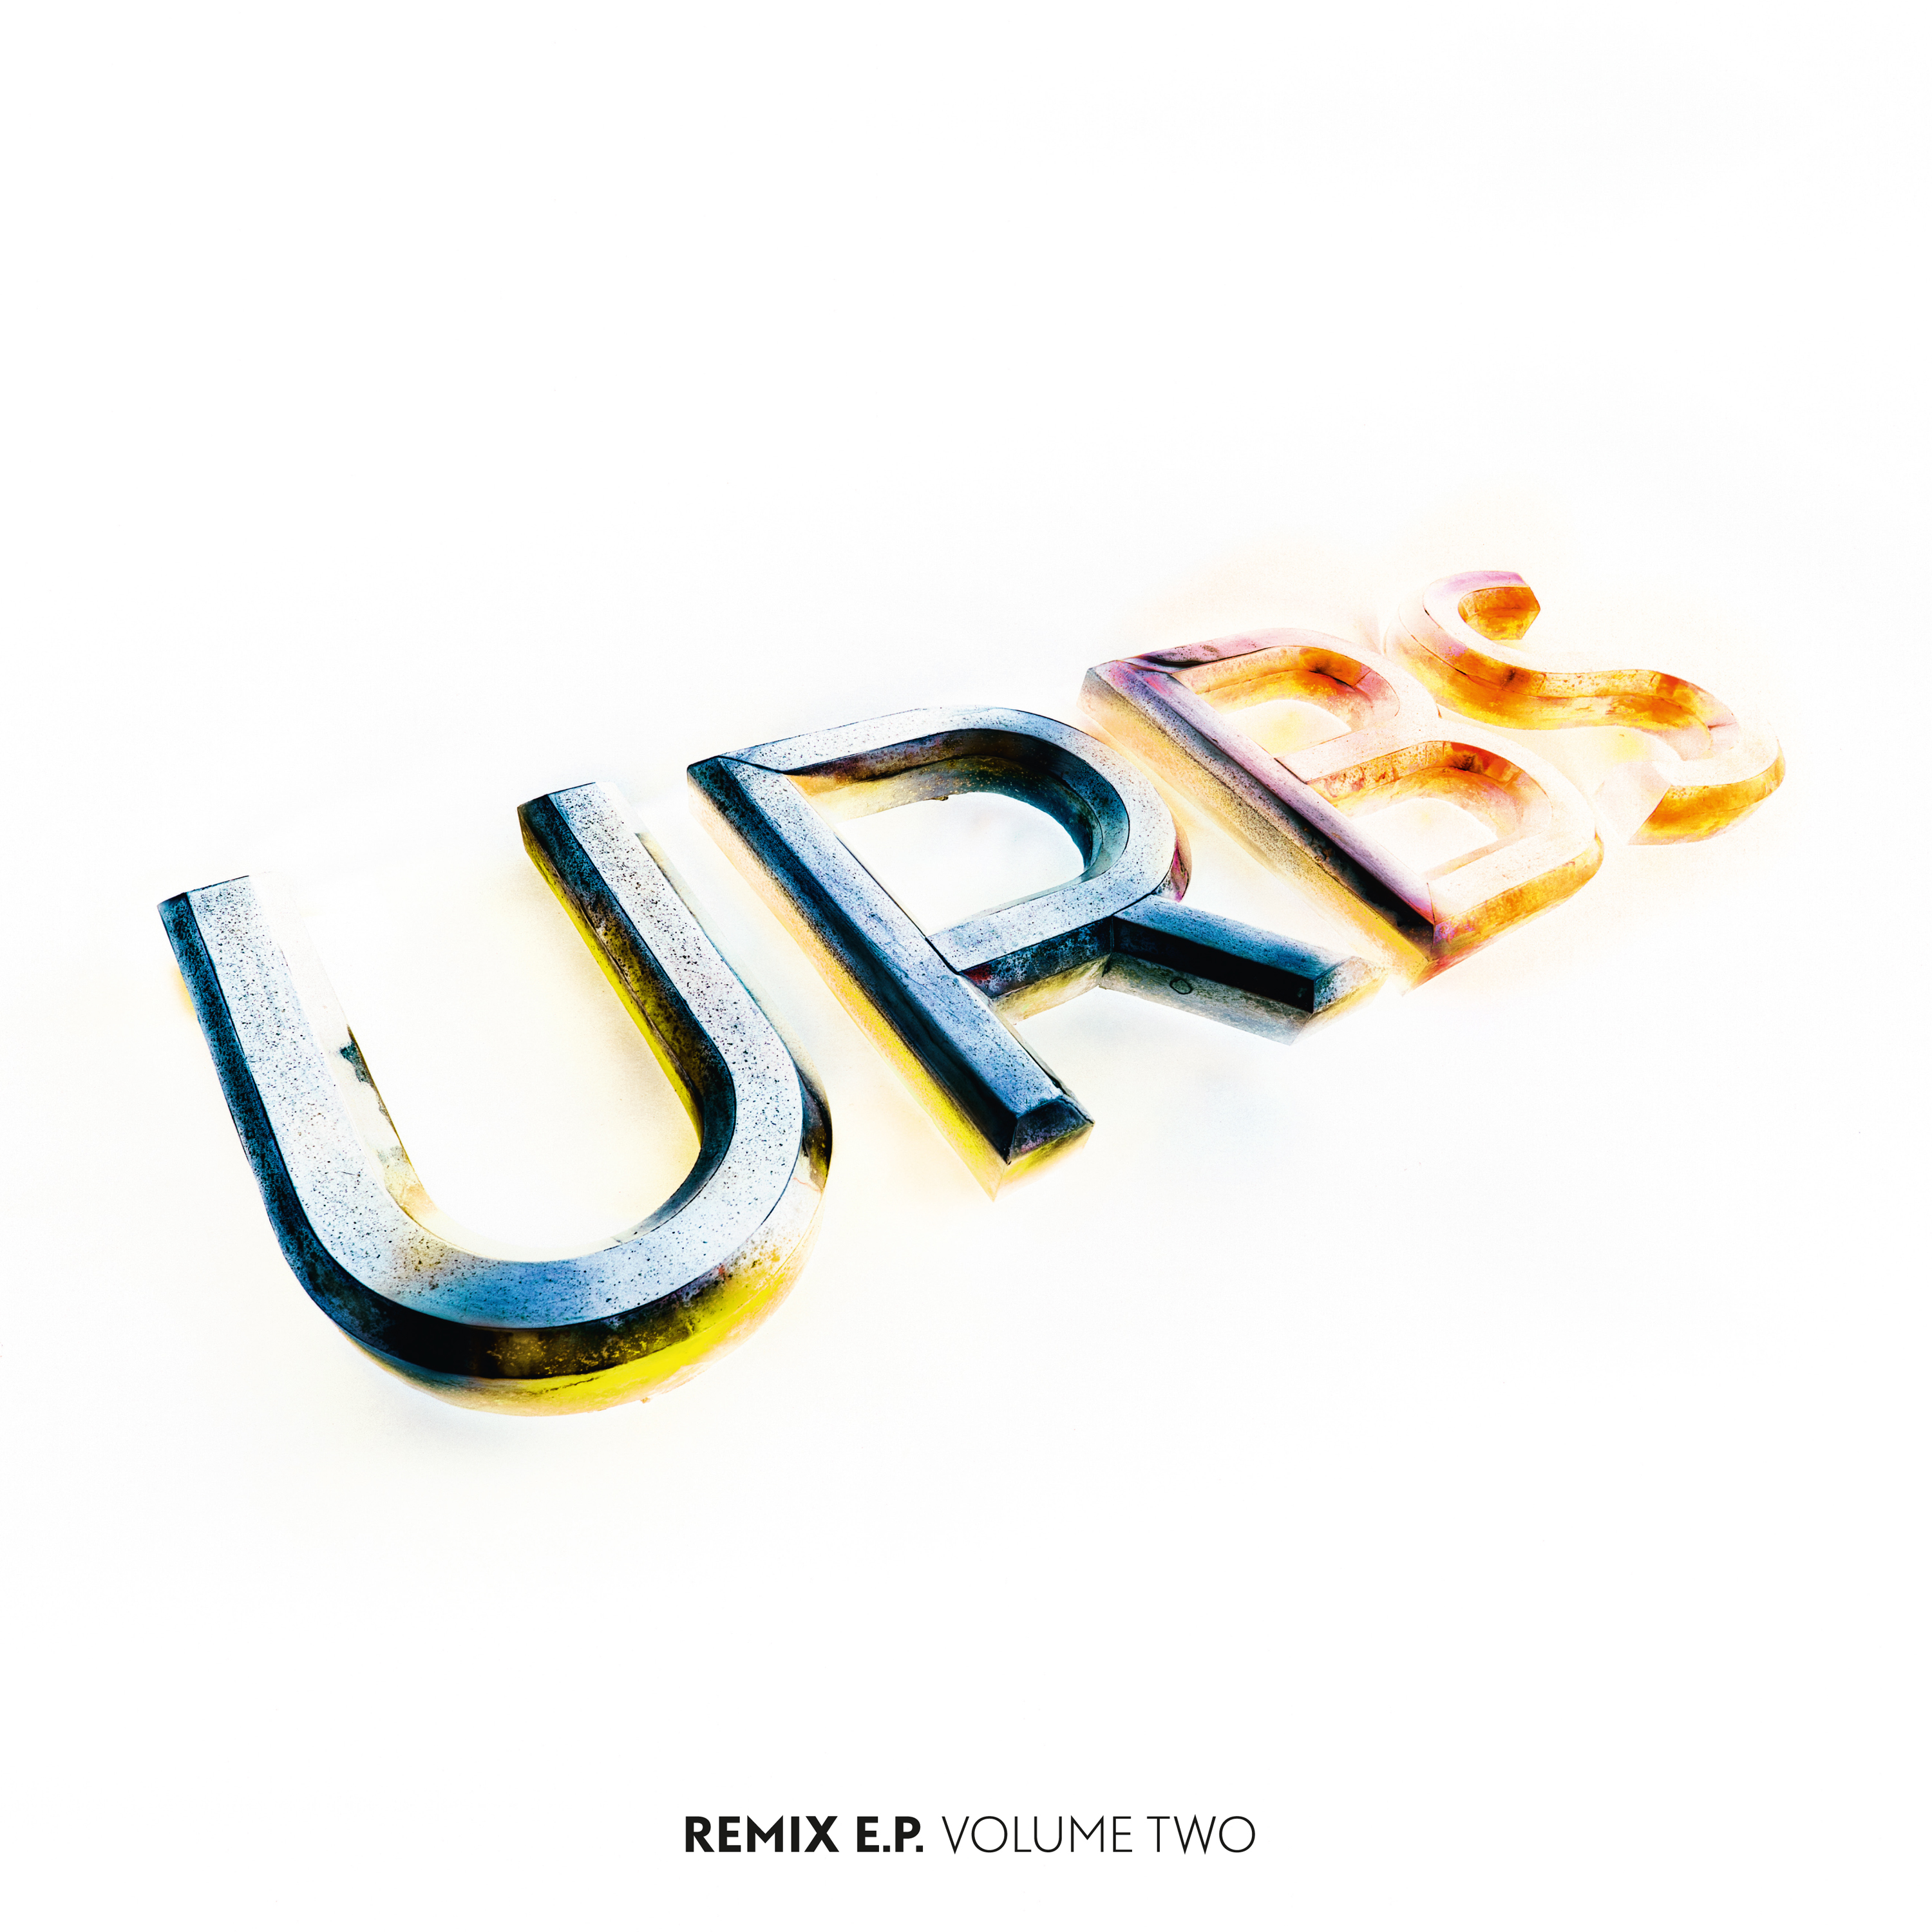 Urbs Remix EP Vol. 2 (incl. remixes by Visioneers, Peter Kruder, Pulsinger & Irl, Jstar, Flip, Trishes)